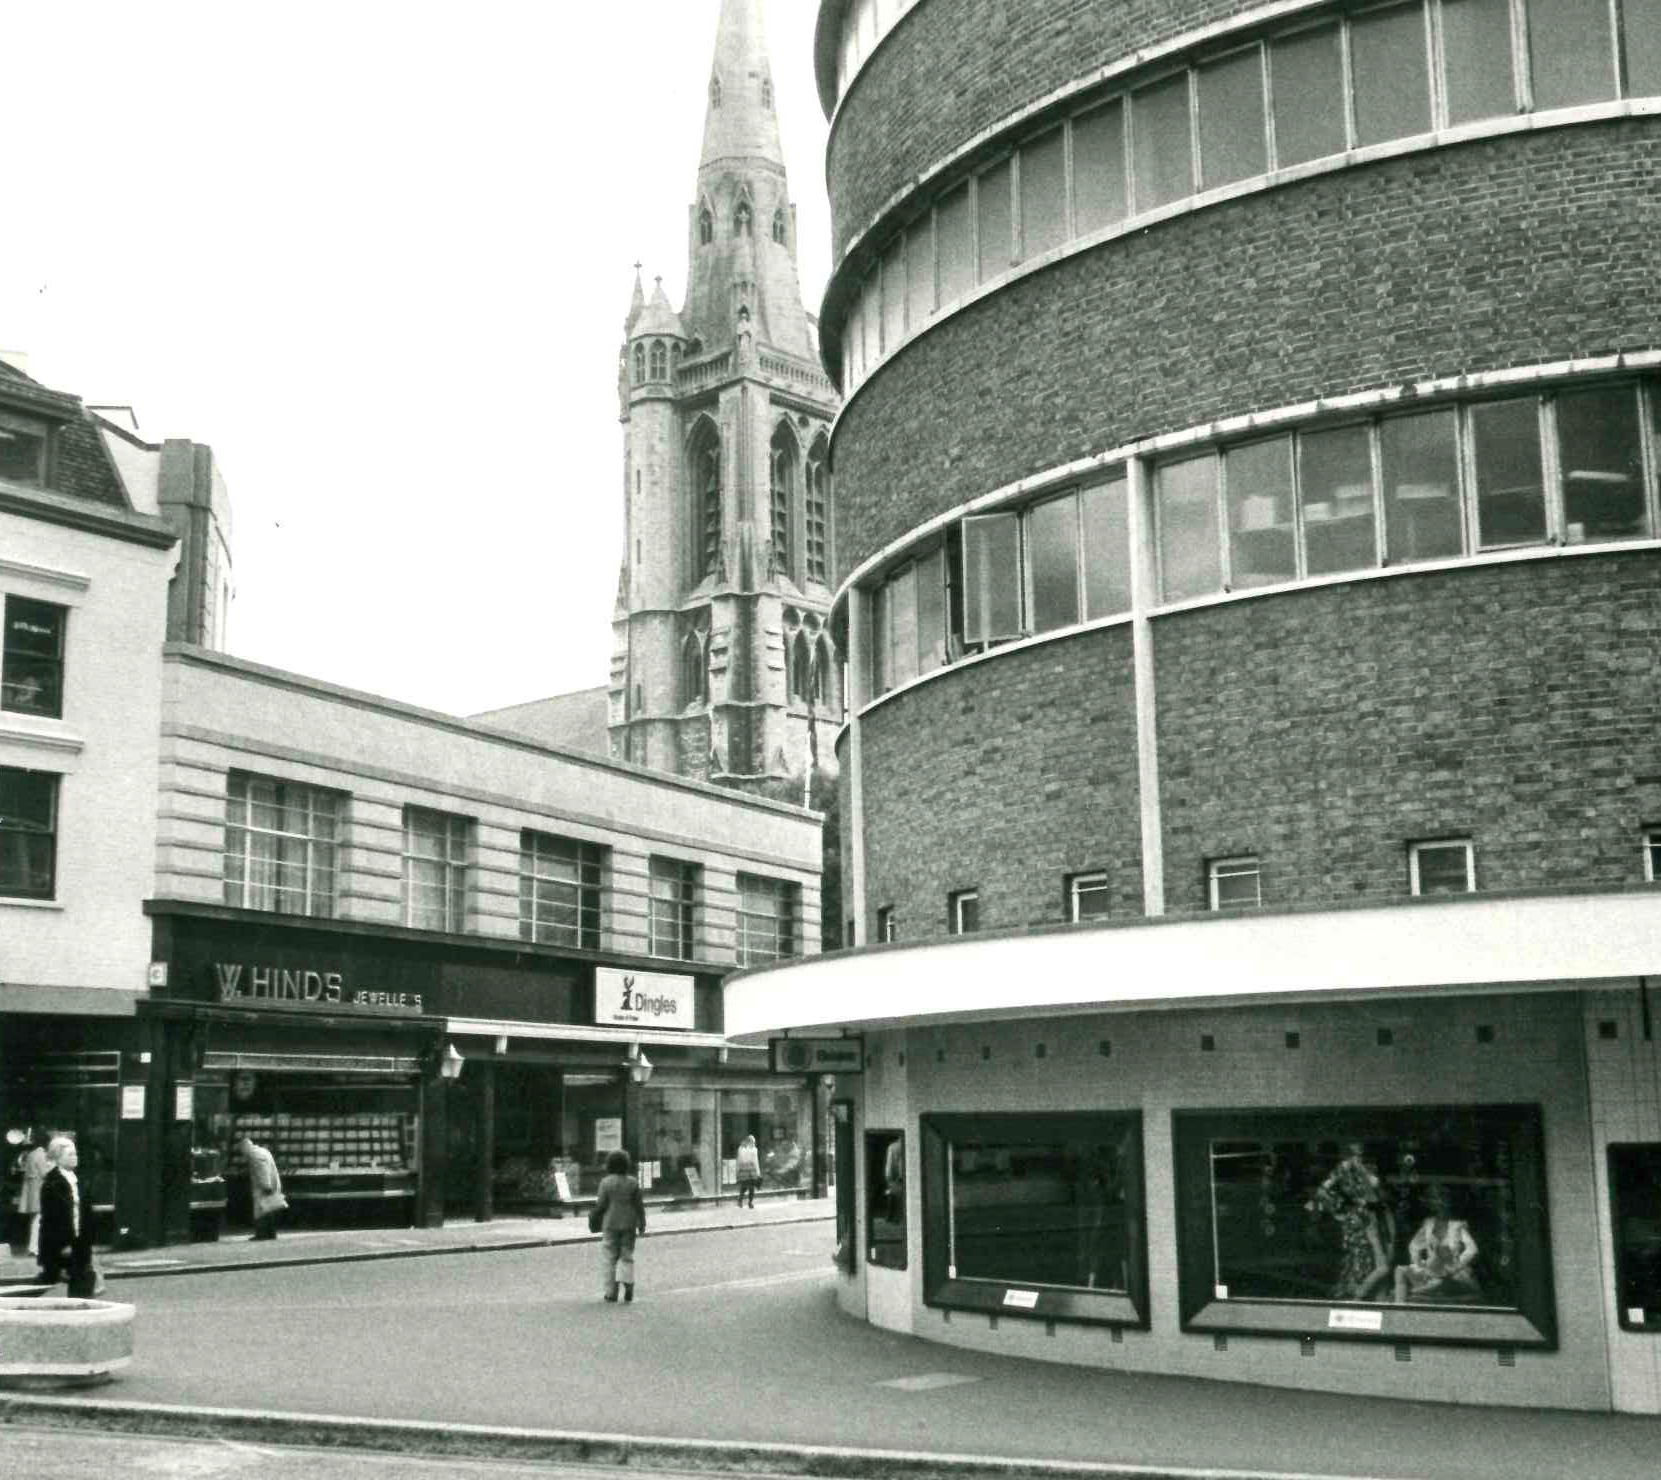 Beales and St Peter’s Church.